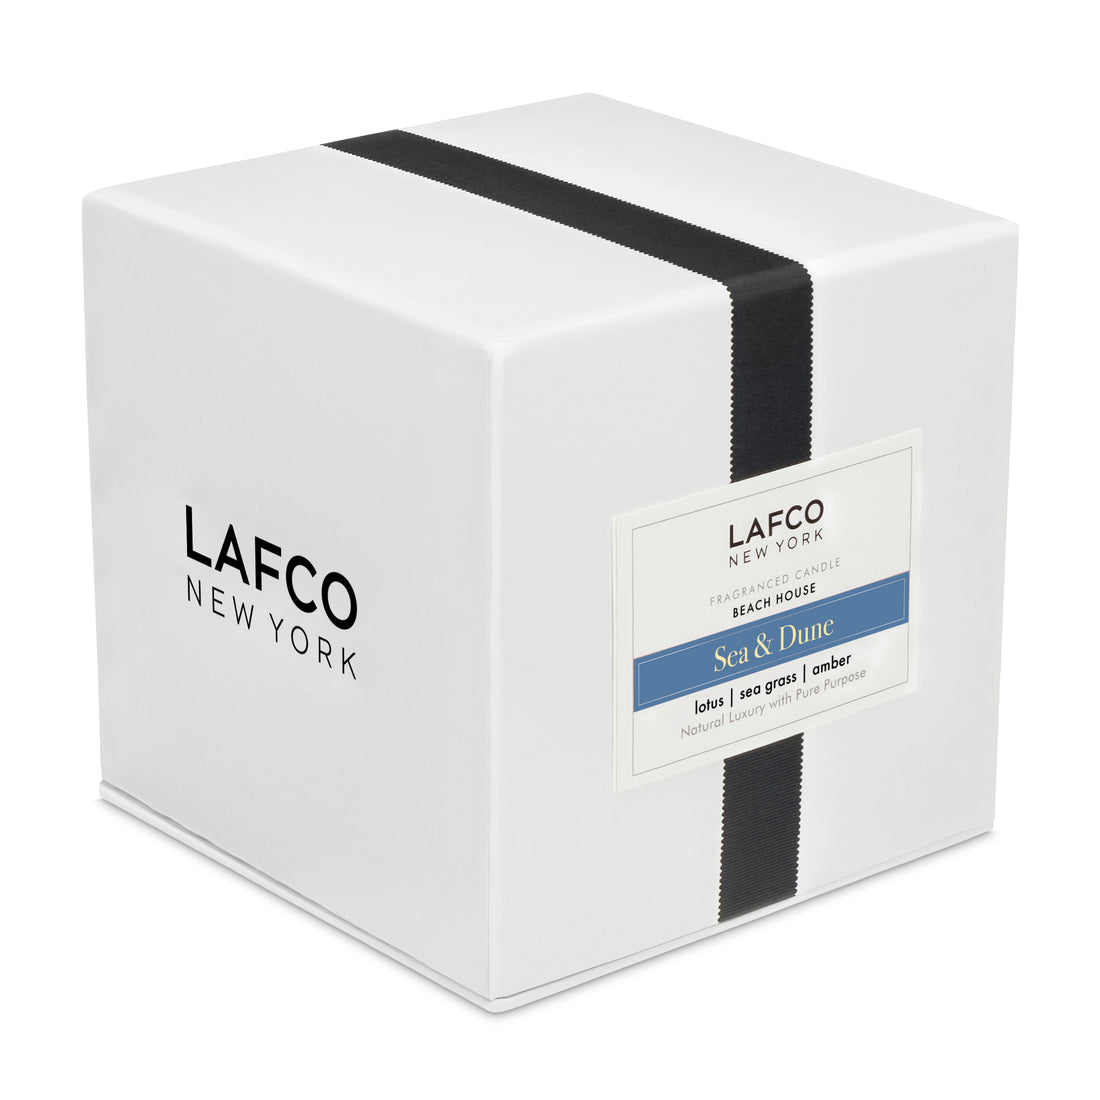 Sea and Dune - LAFCO Candle